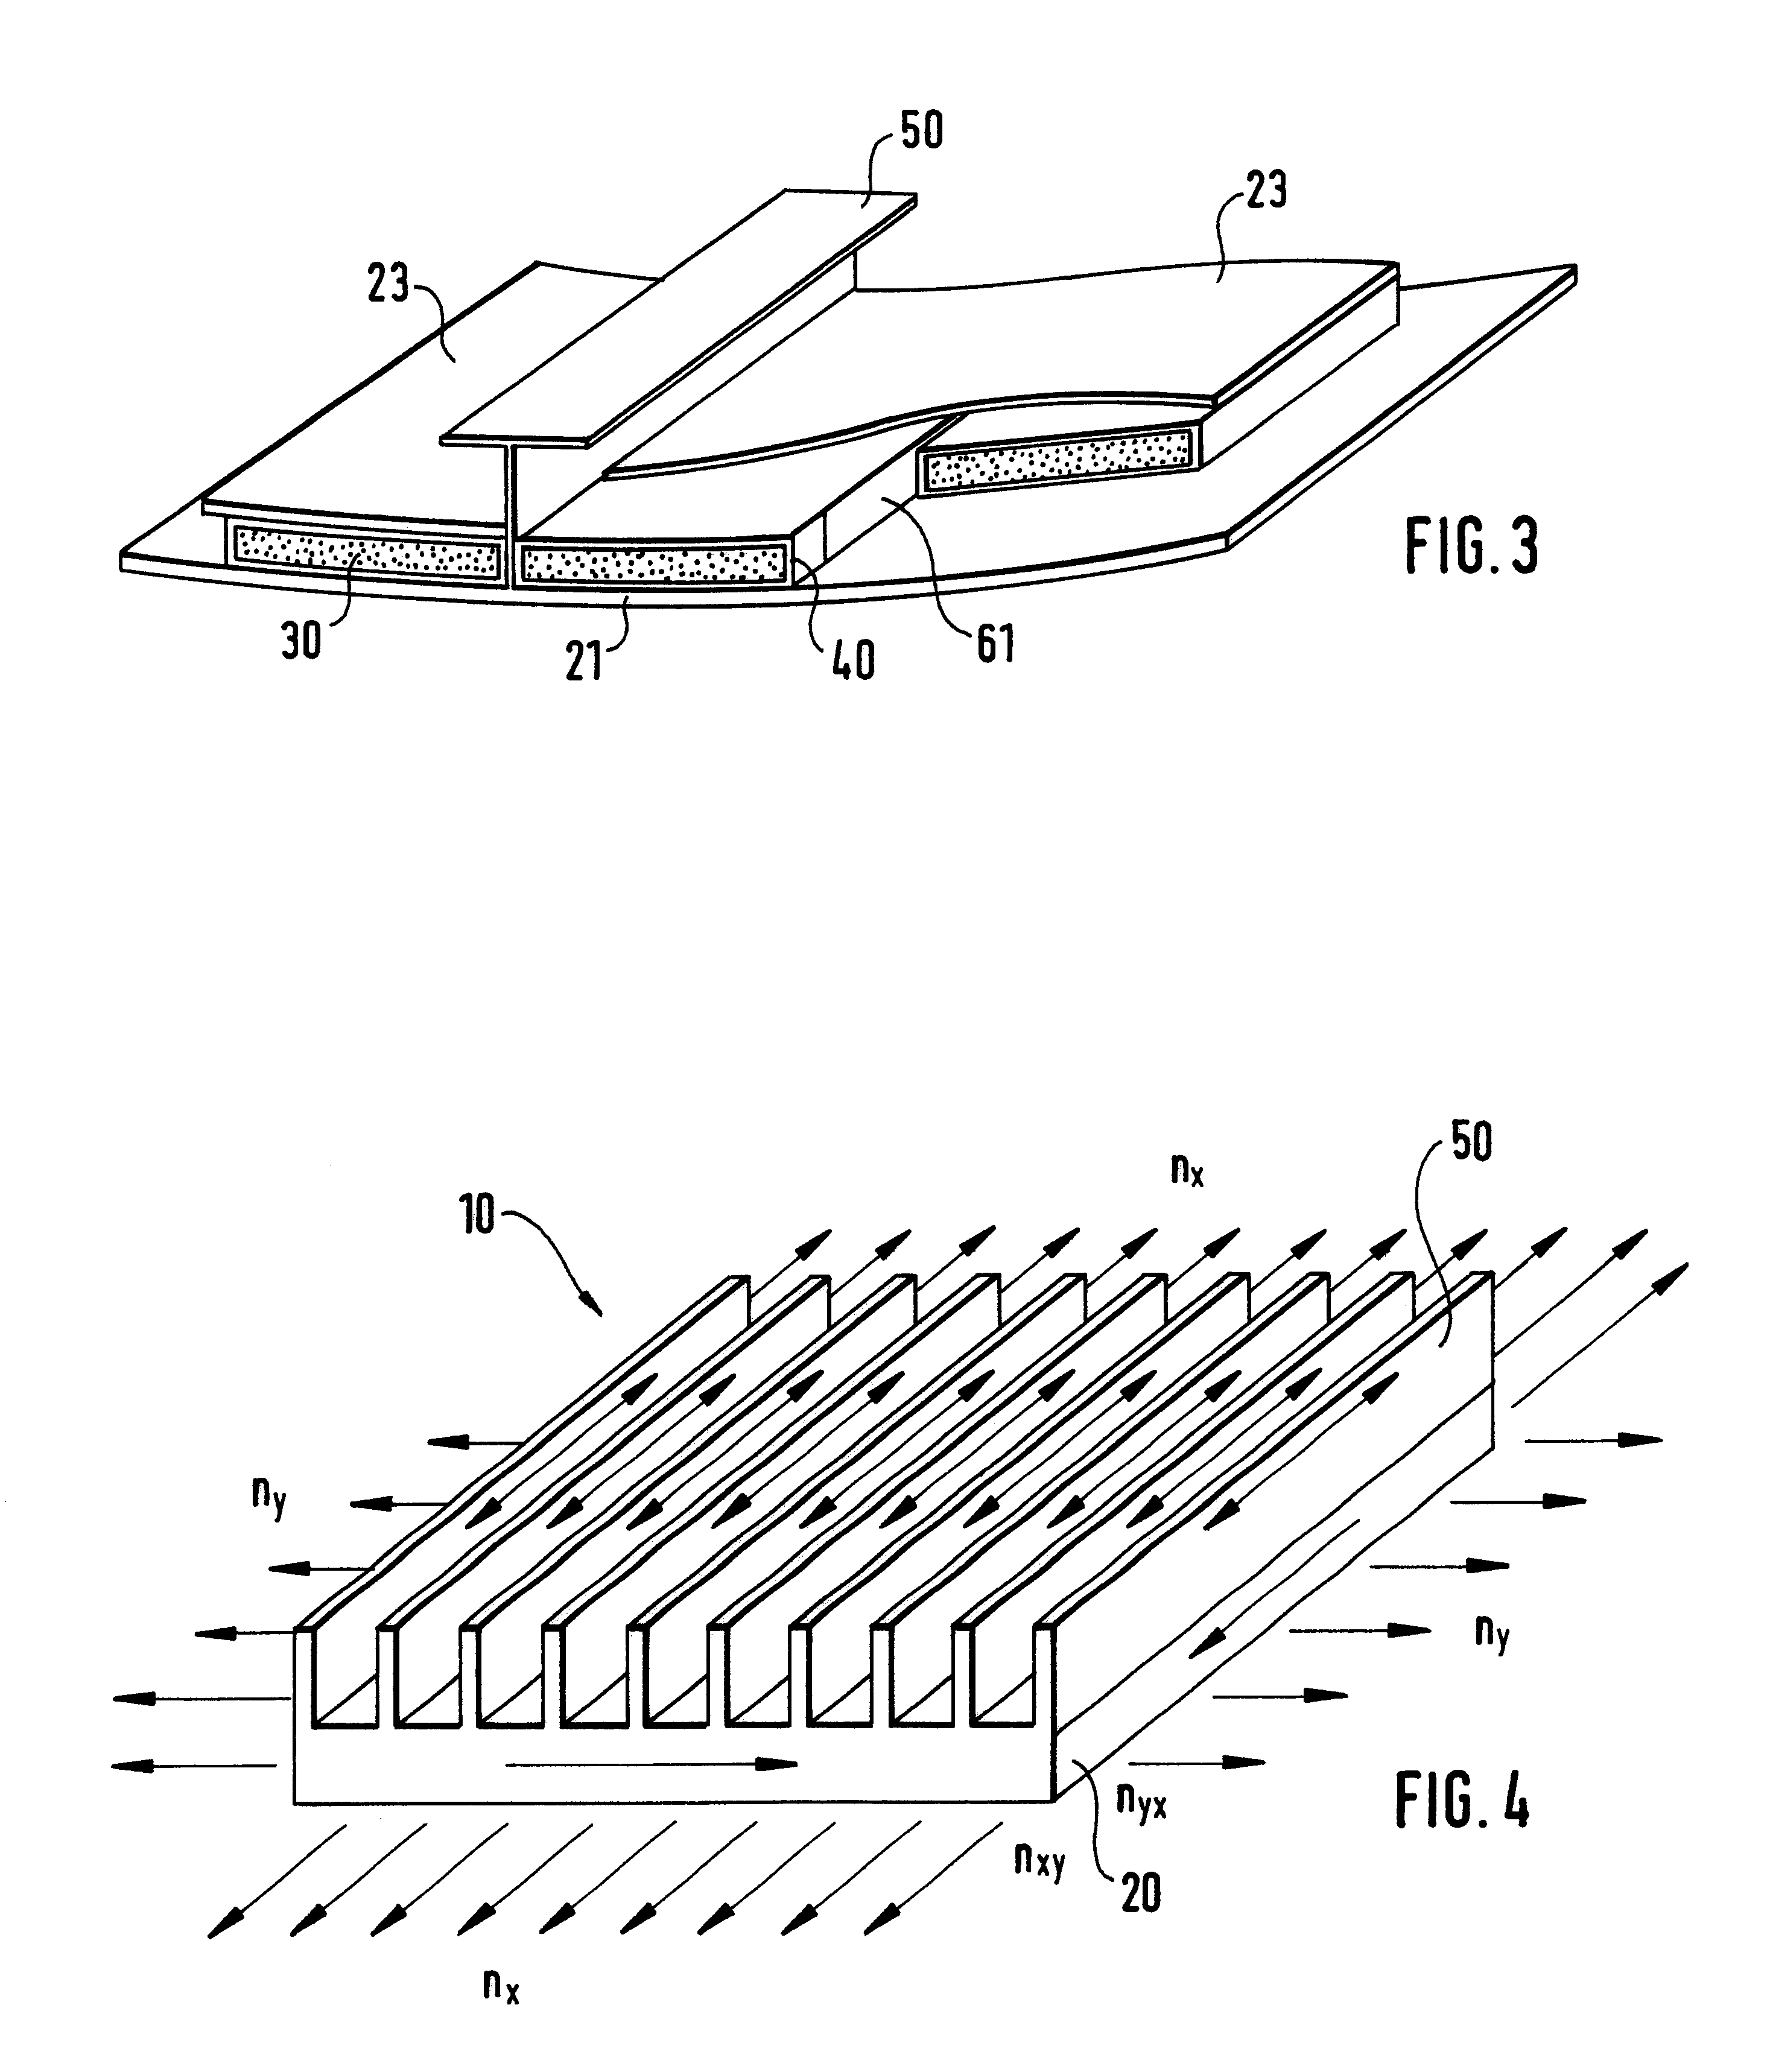 Structural element of high unidirectional rigidity